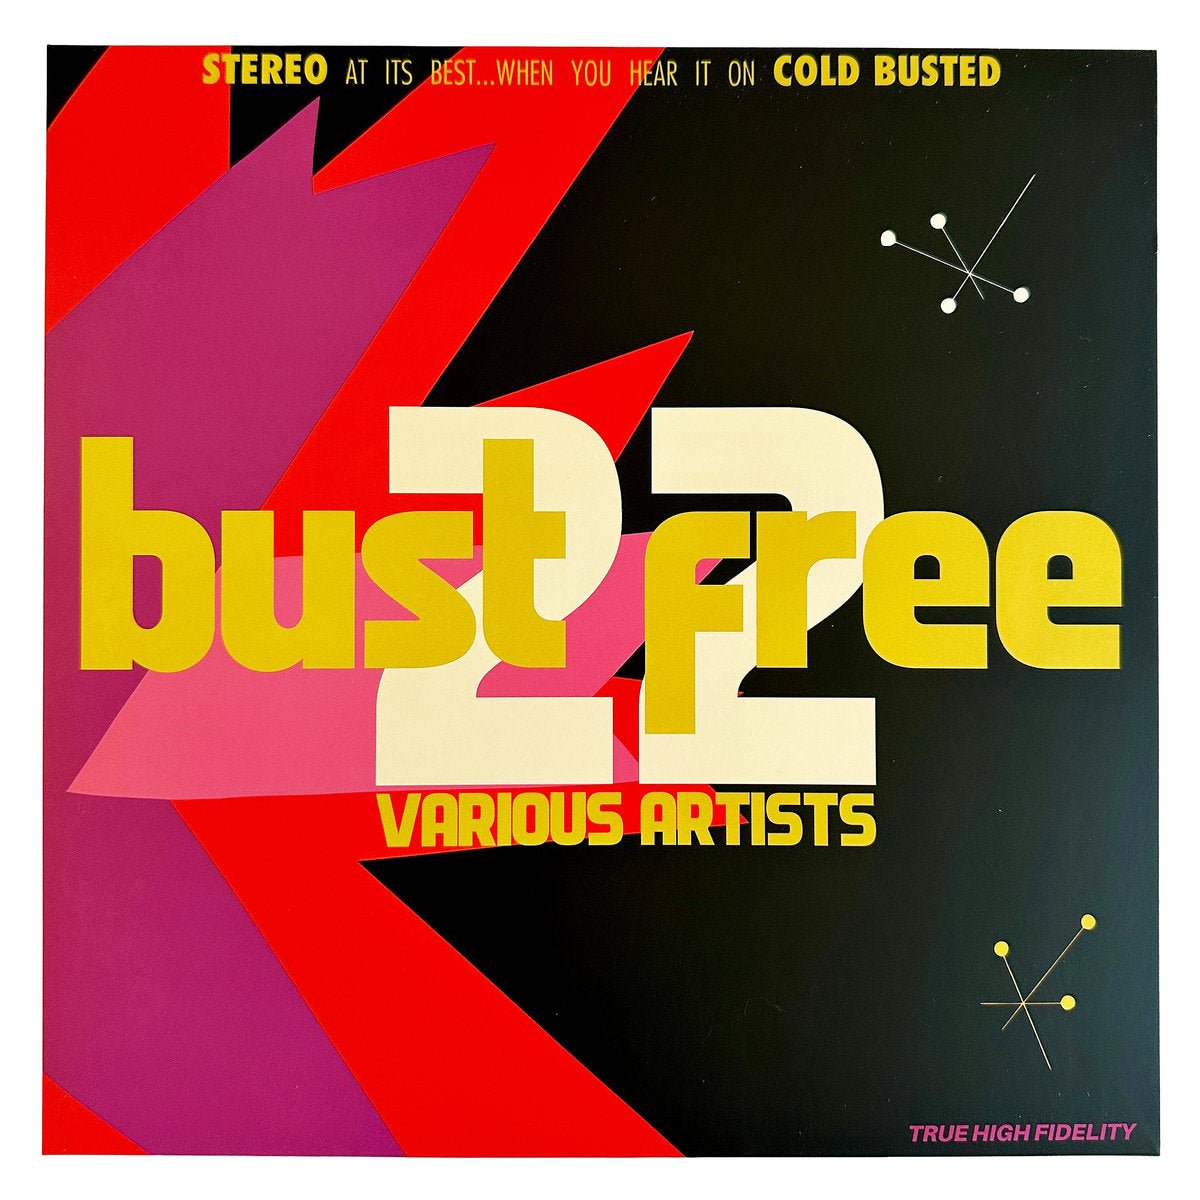 Various Artists - Bust Free 22 - Limited Edition White and Pink Marbled Colored 12 Inch Vinyl - COLD BUSTED